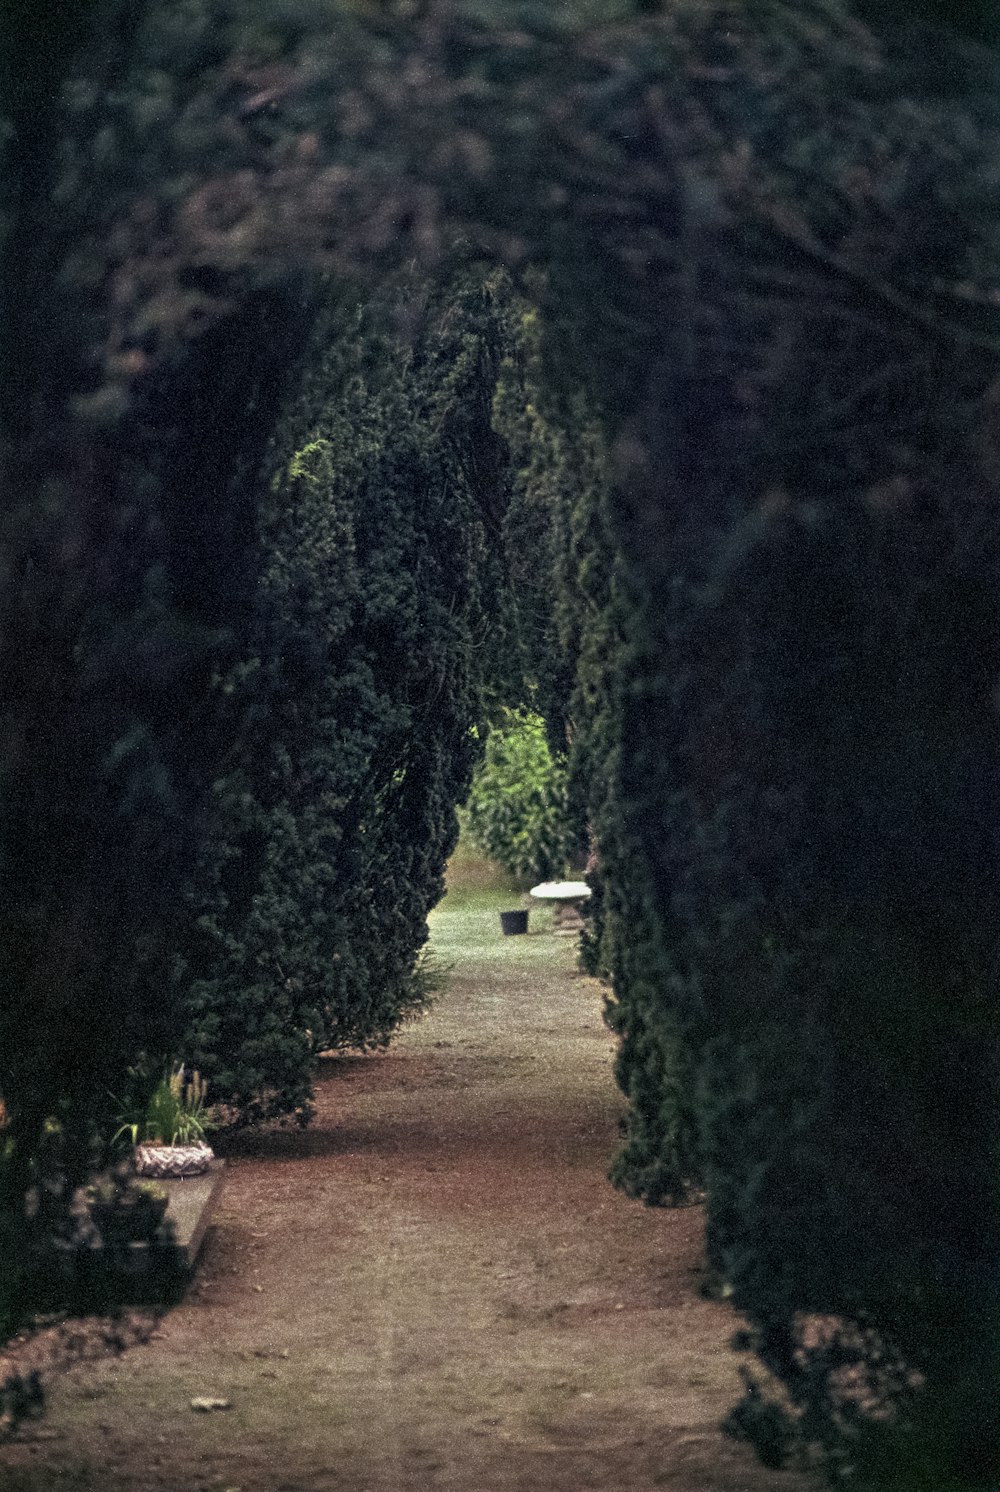 a view of a path through some trees